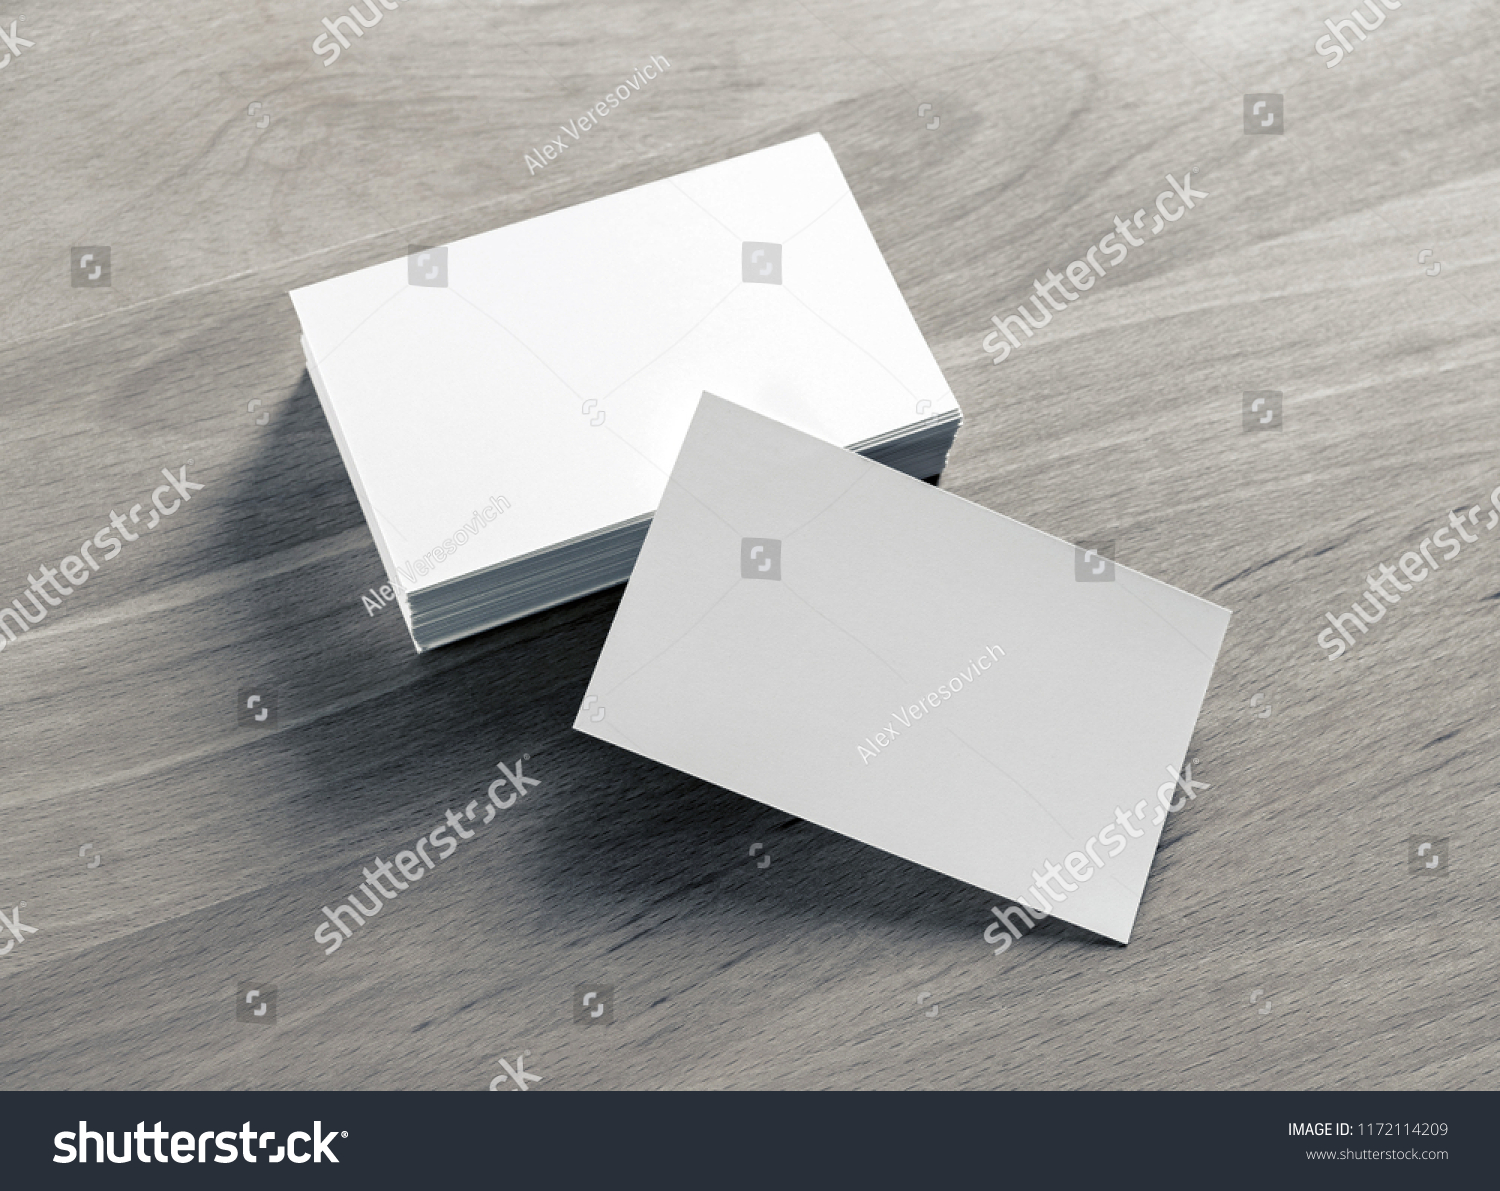 Blank white business cards on wood table background. Mockup for branding identity. #1172114209